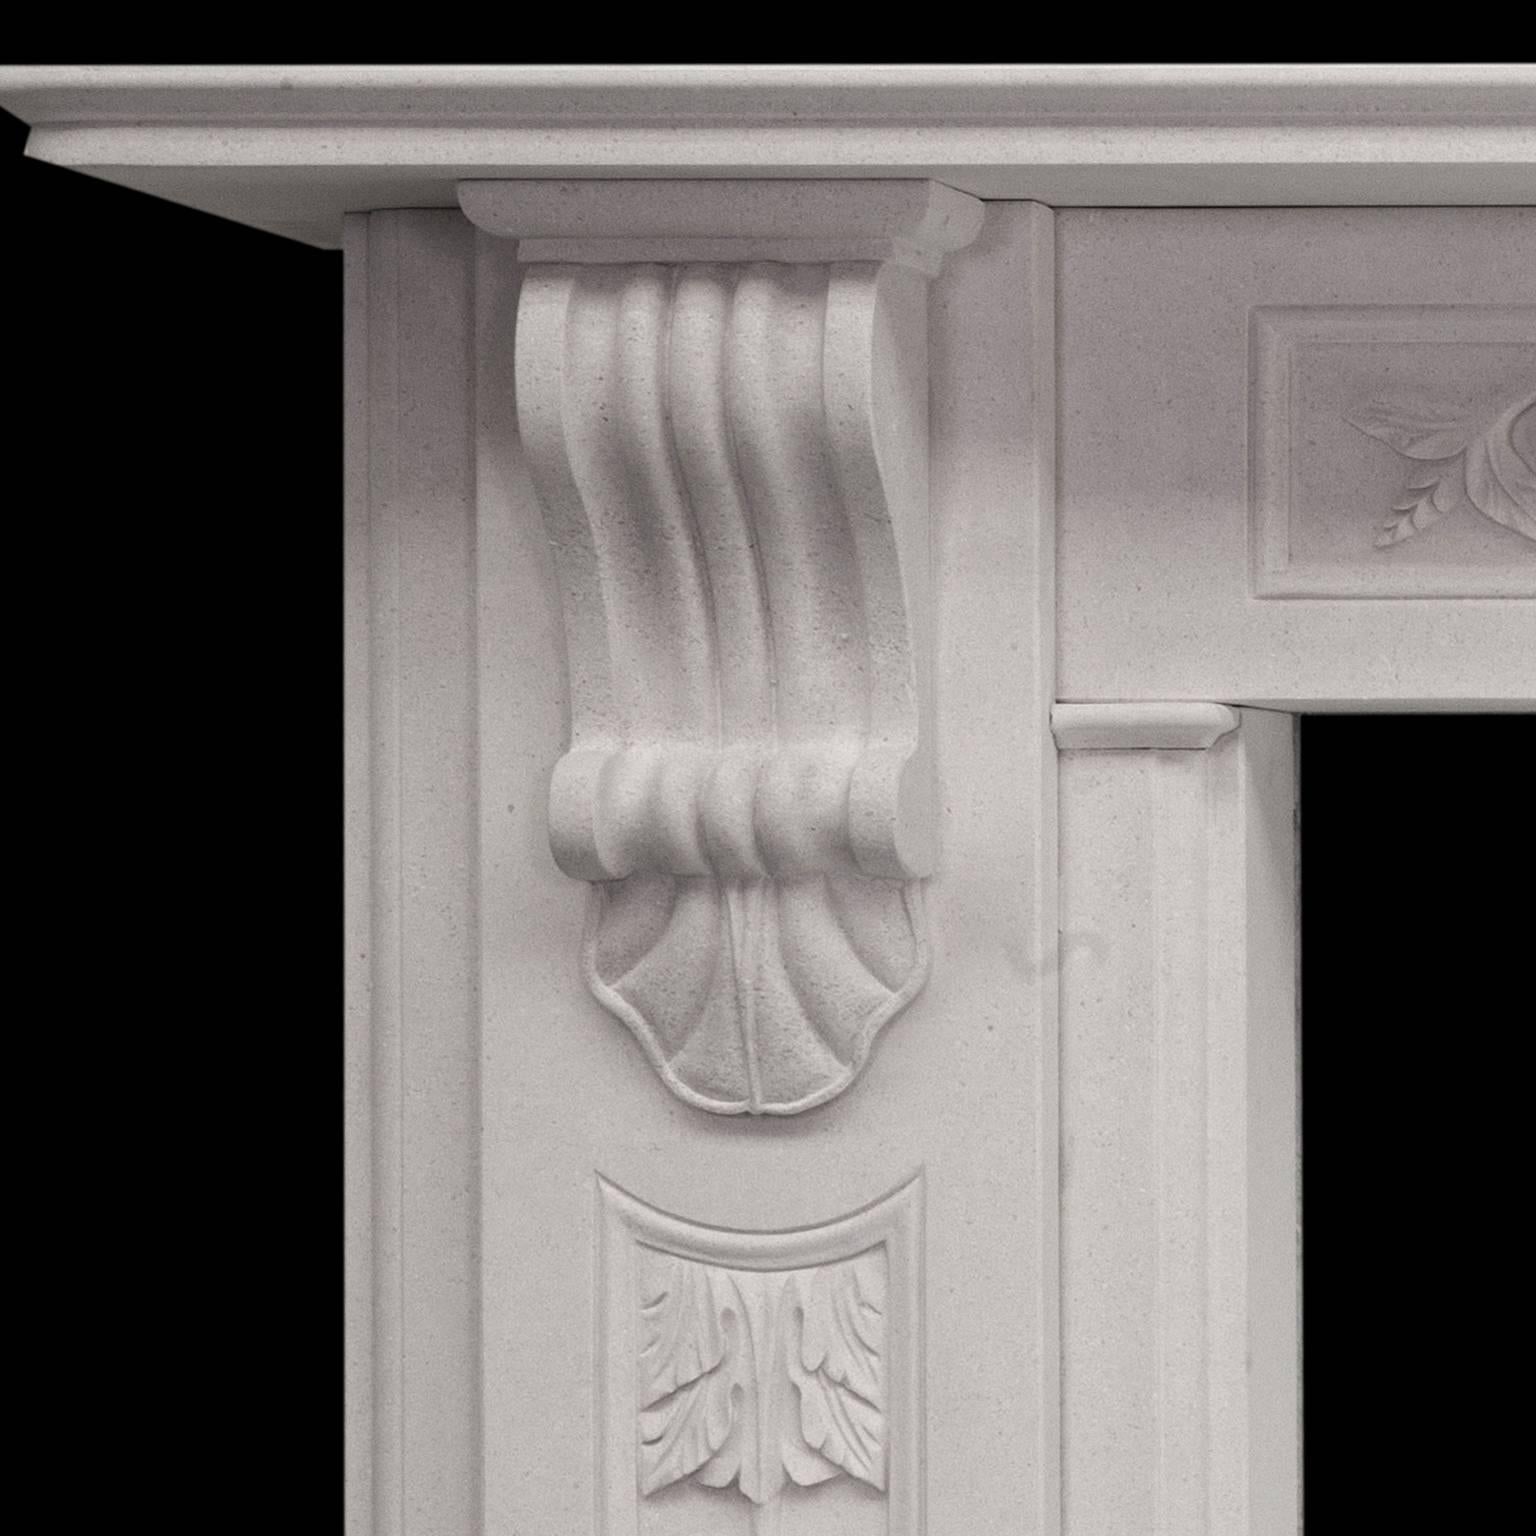 An impressive large English made white limestone fireplace mantel.
Hand-carved corbels, with detailed recessed panels and acanthus leaf carvings on jamb and frieze.